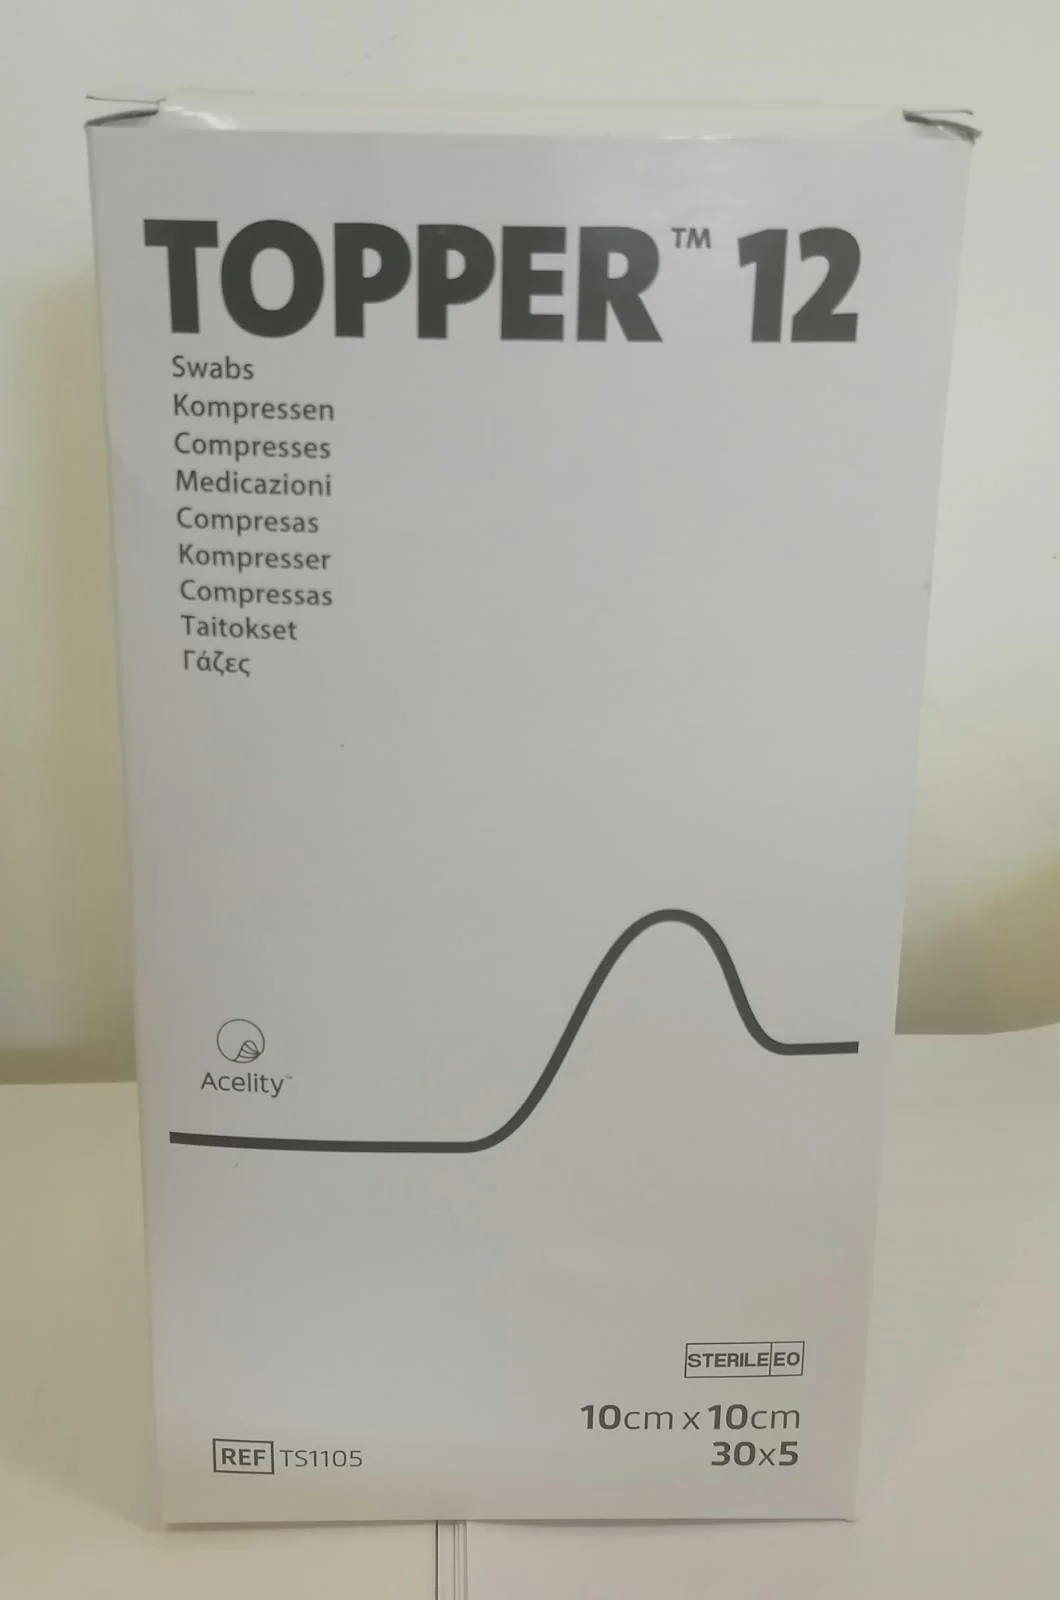 Picture of Topper 12 swabs 10x10cm (30x5 Sterile)